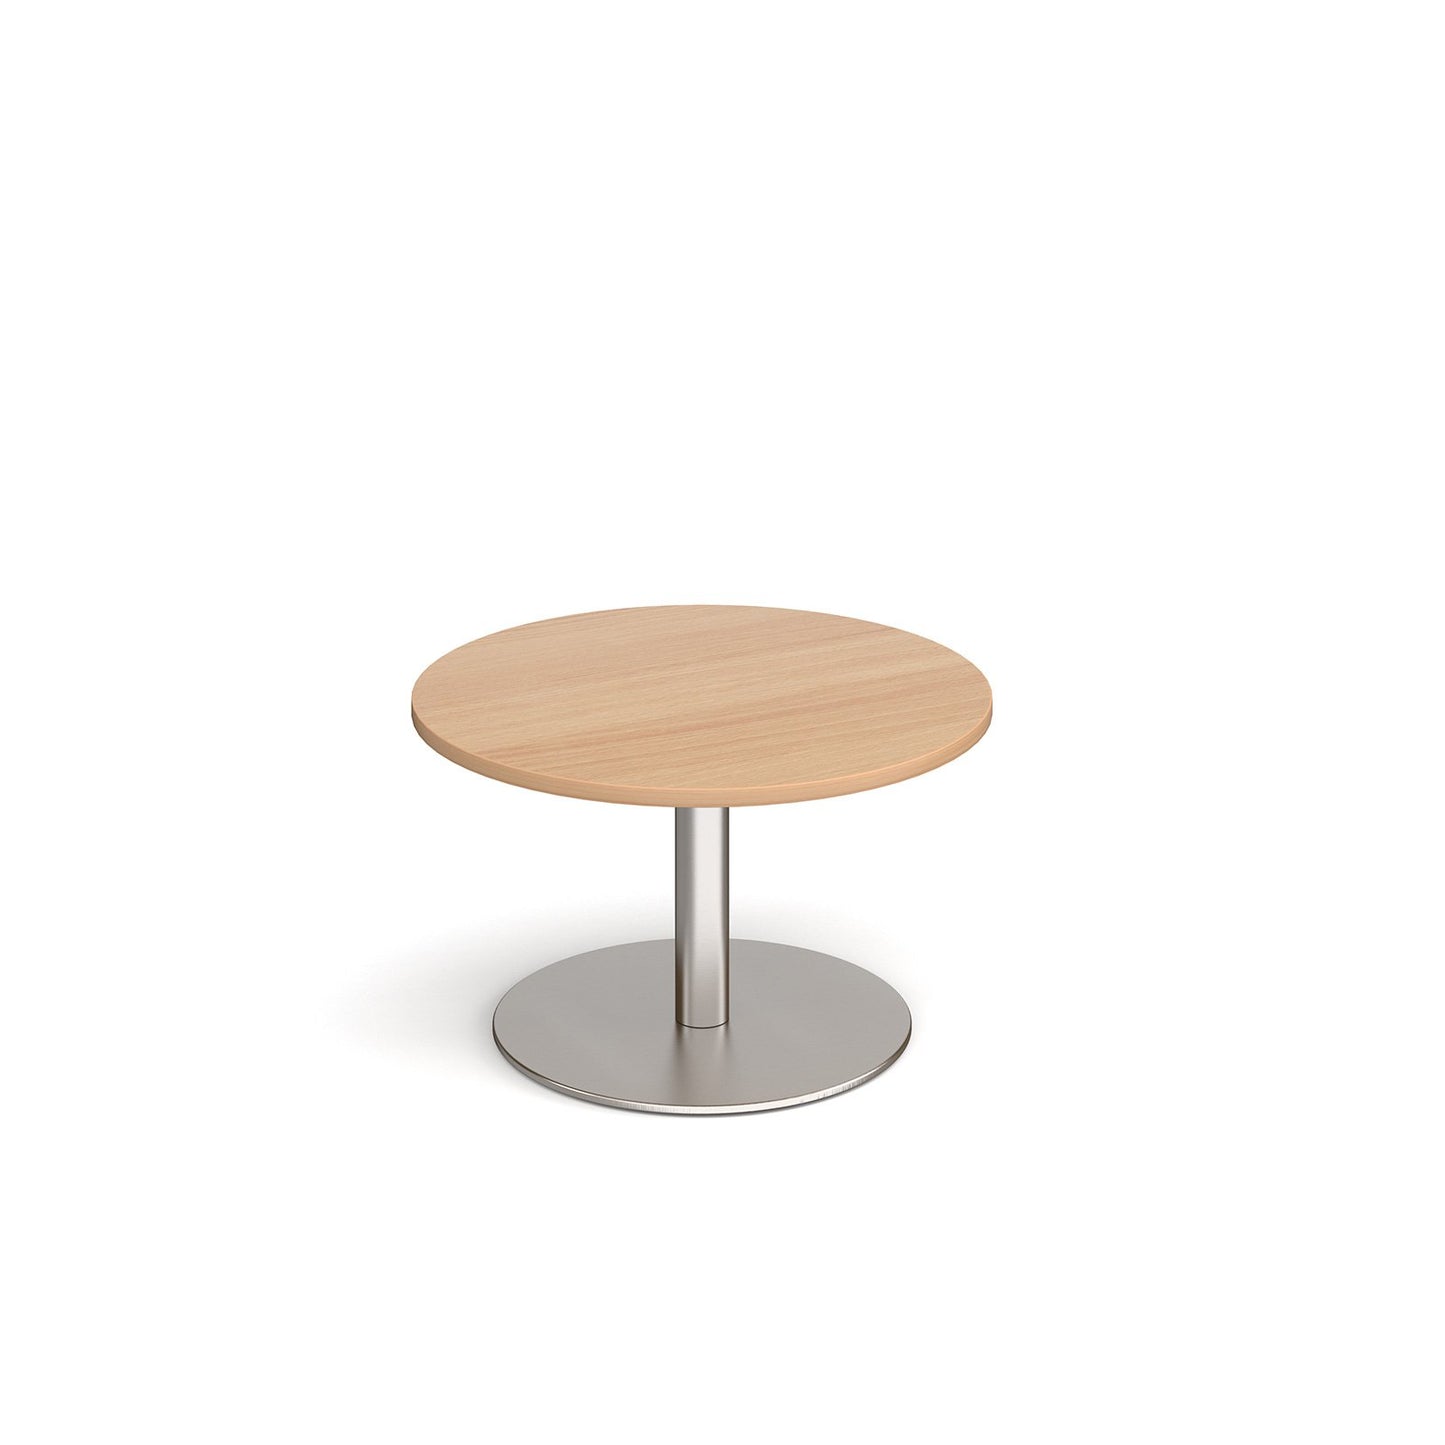 Monza circular coffee table with flat round base